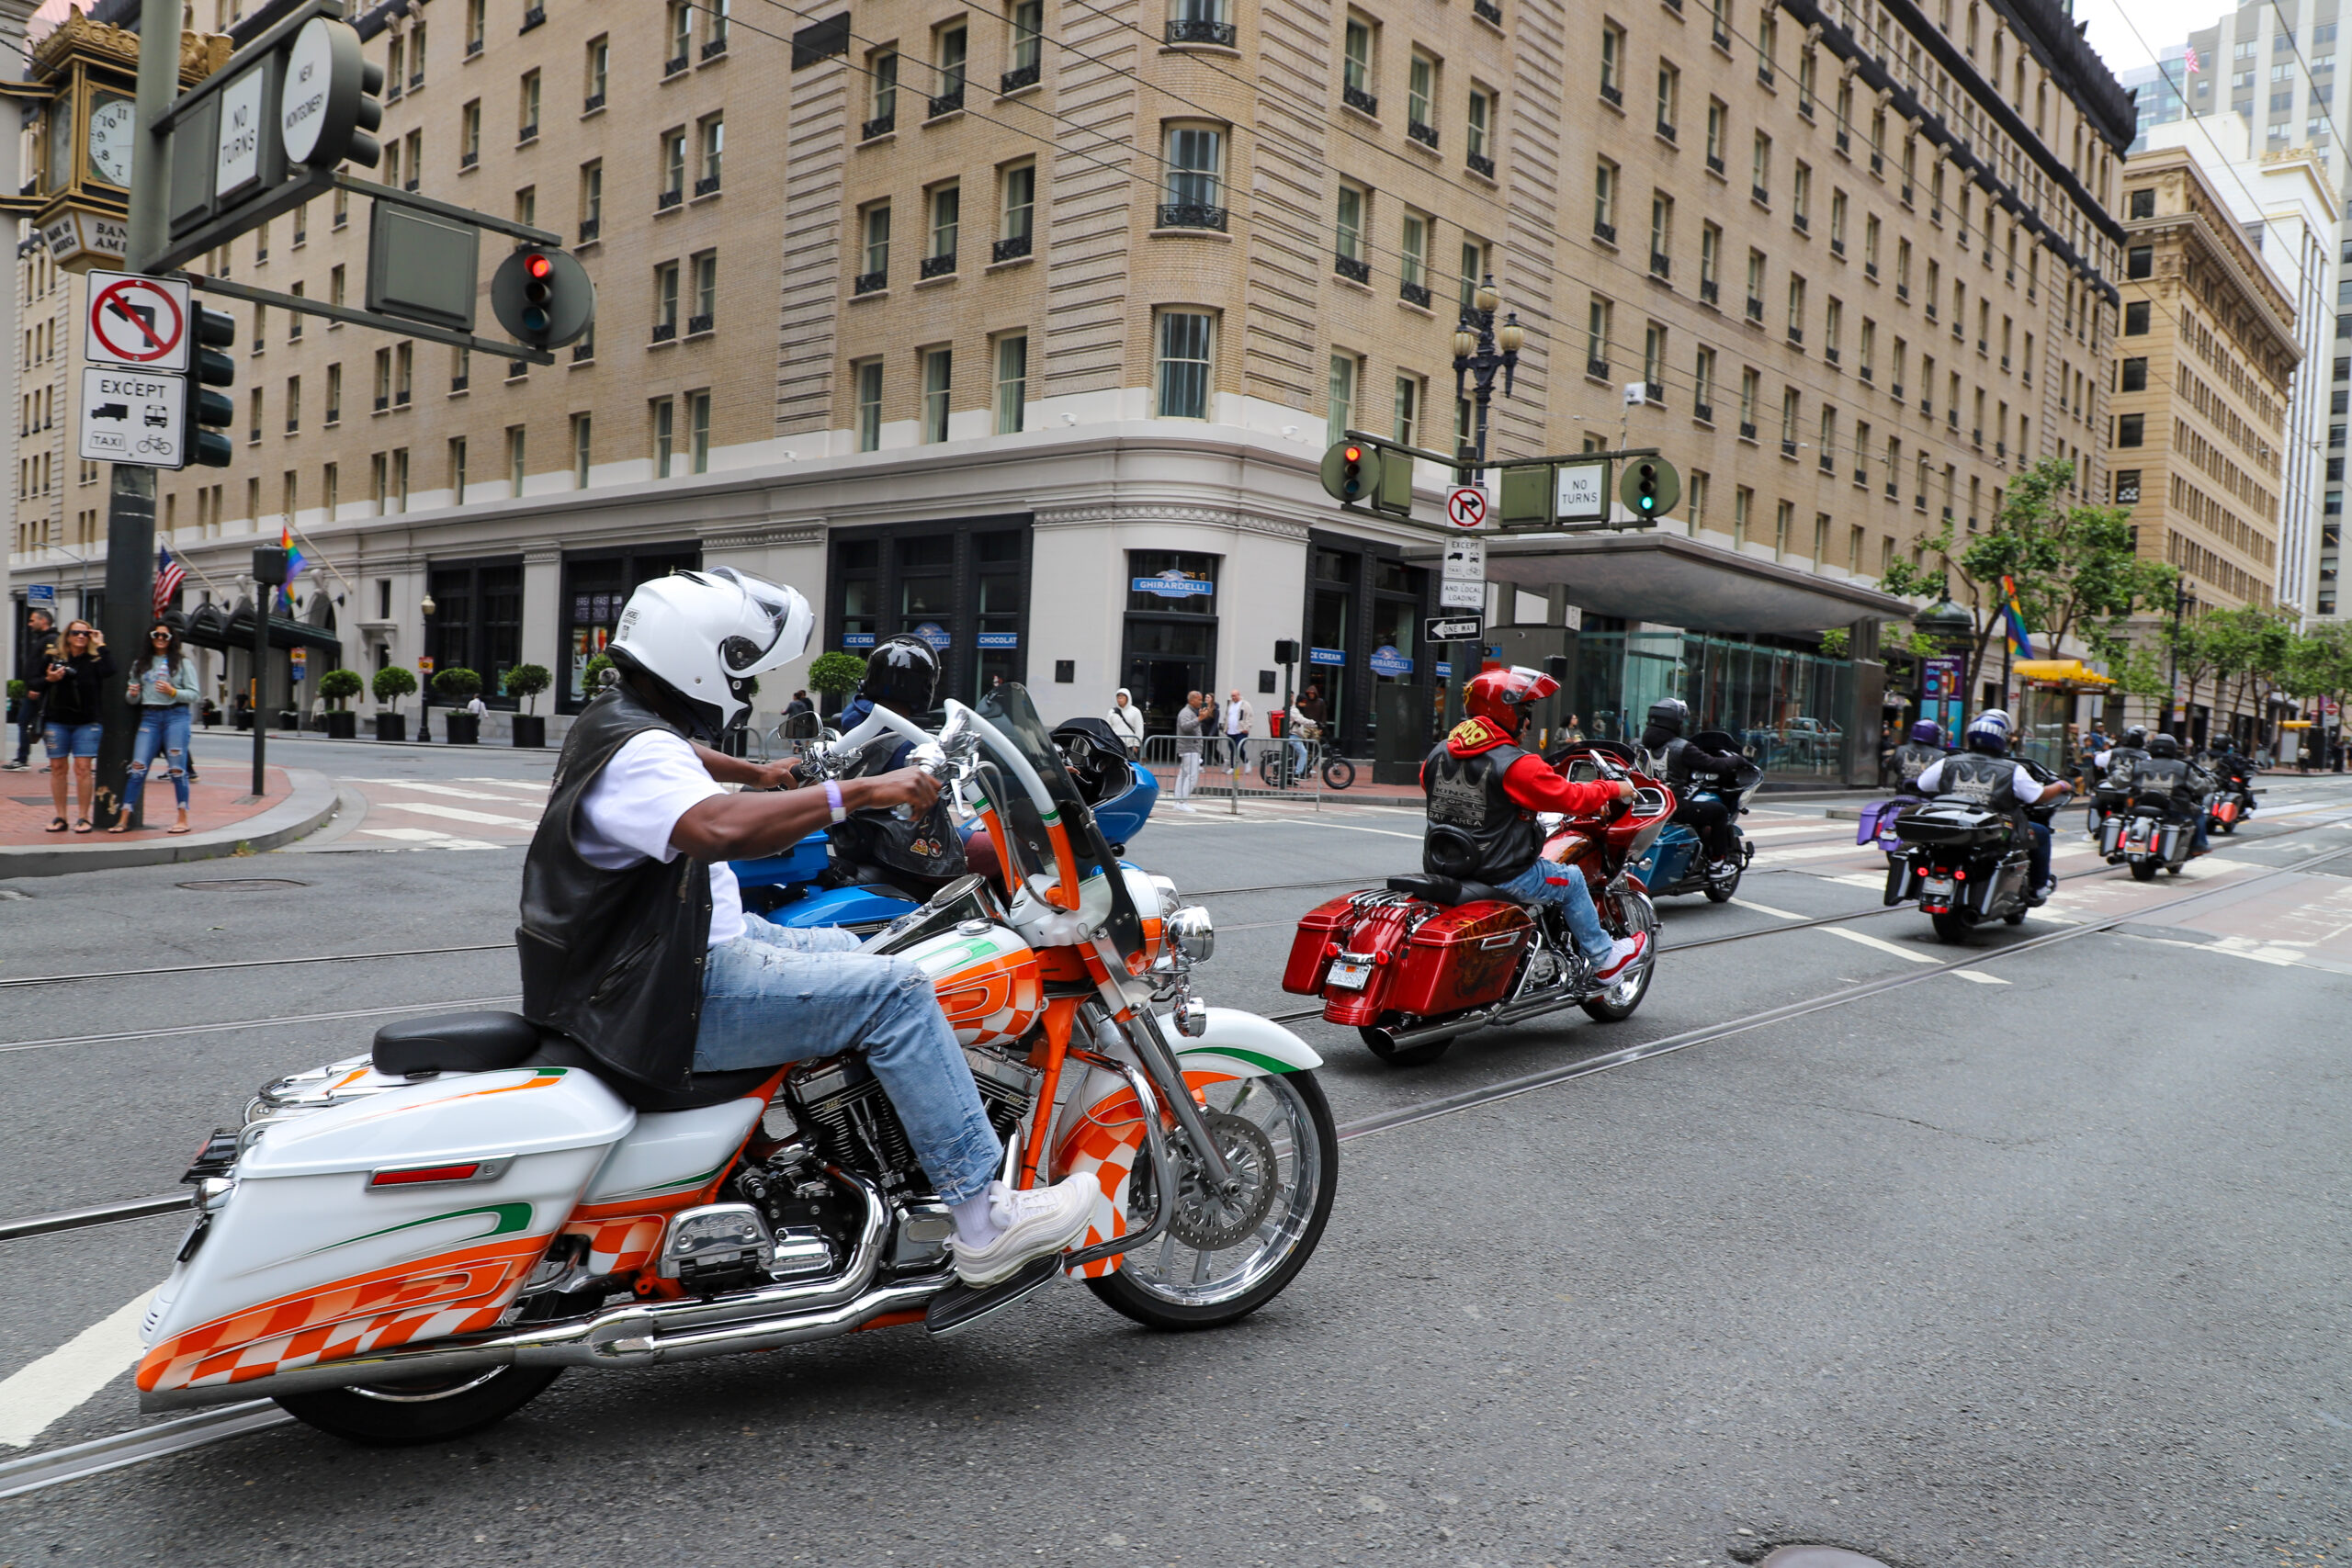 Motorcyclists riding in a city.